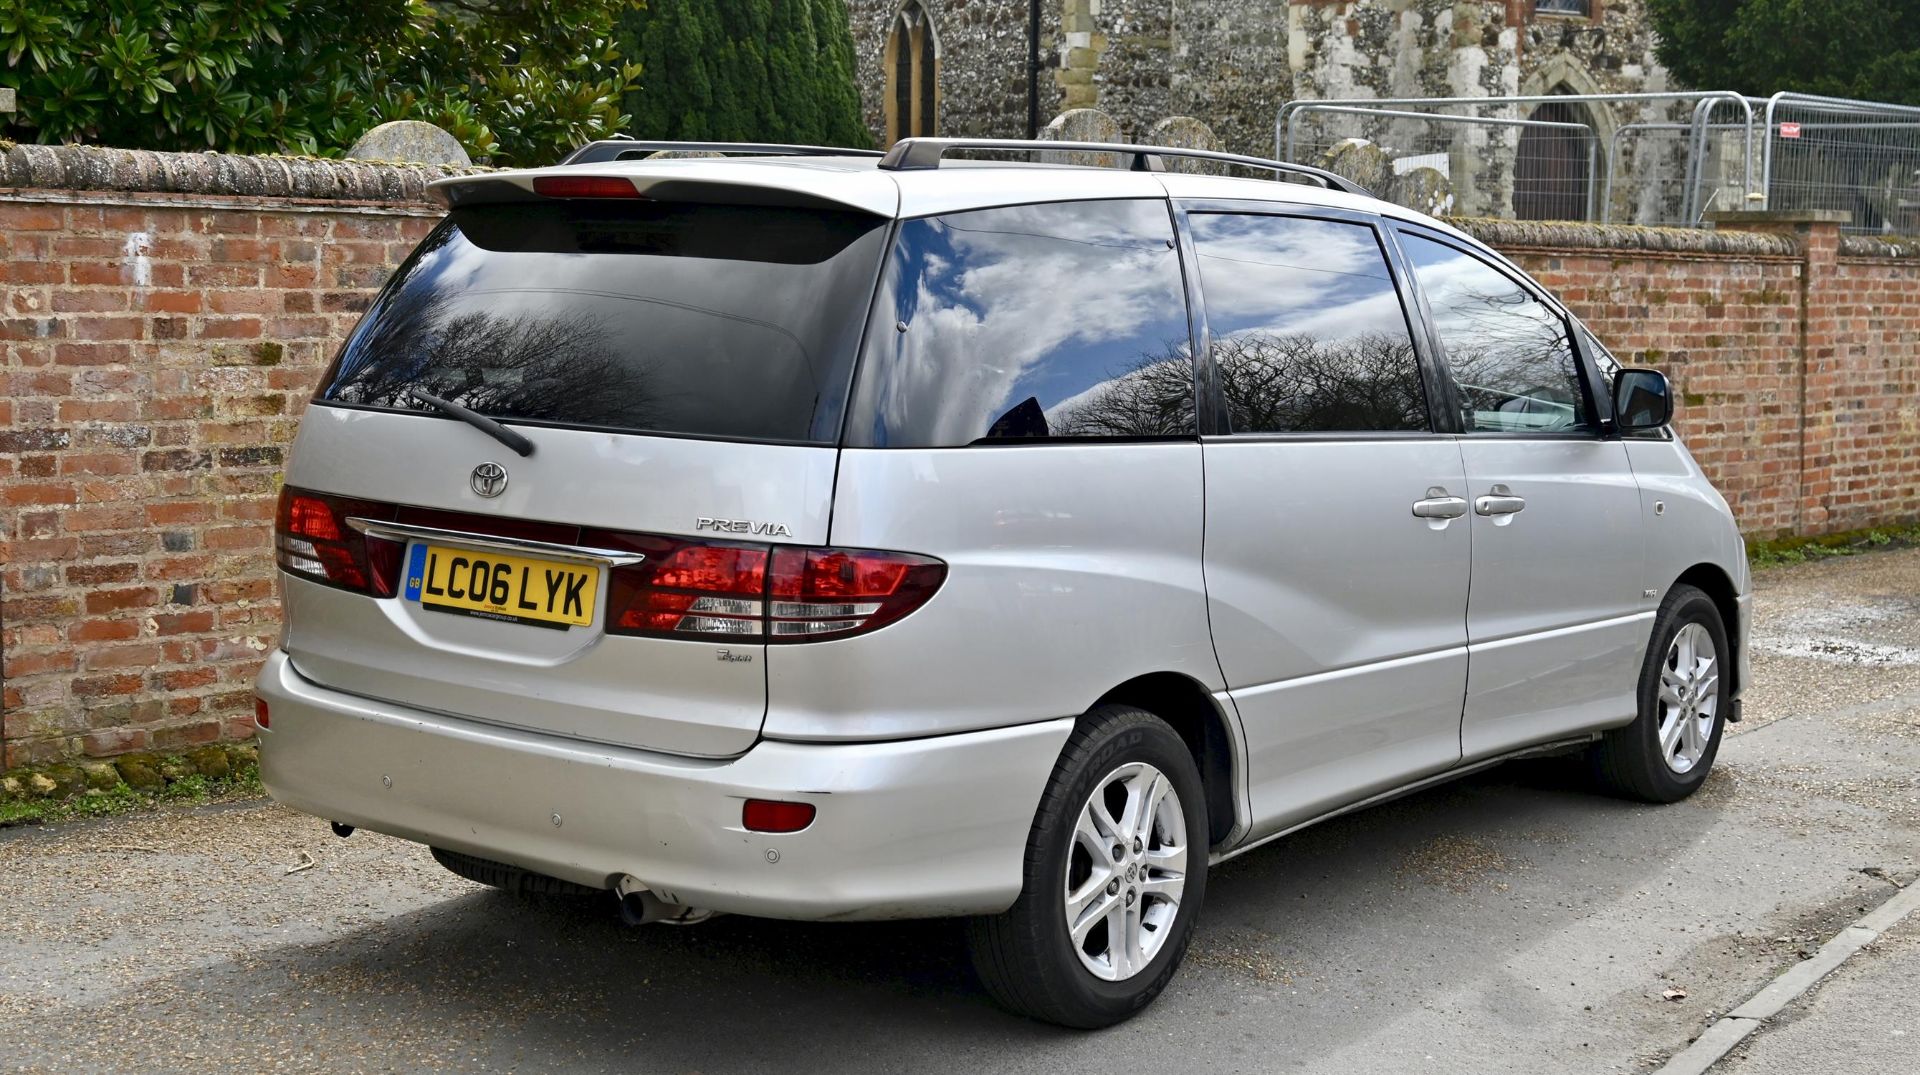 2006 Toyota Previa T-Spirit 2.4 VVTi Auto 7-Seater. Registration number LC06 LYK. - Image 2 of 11